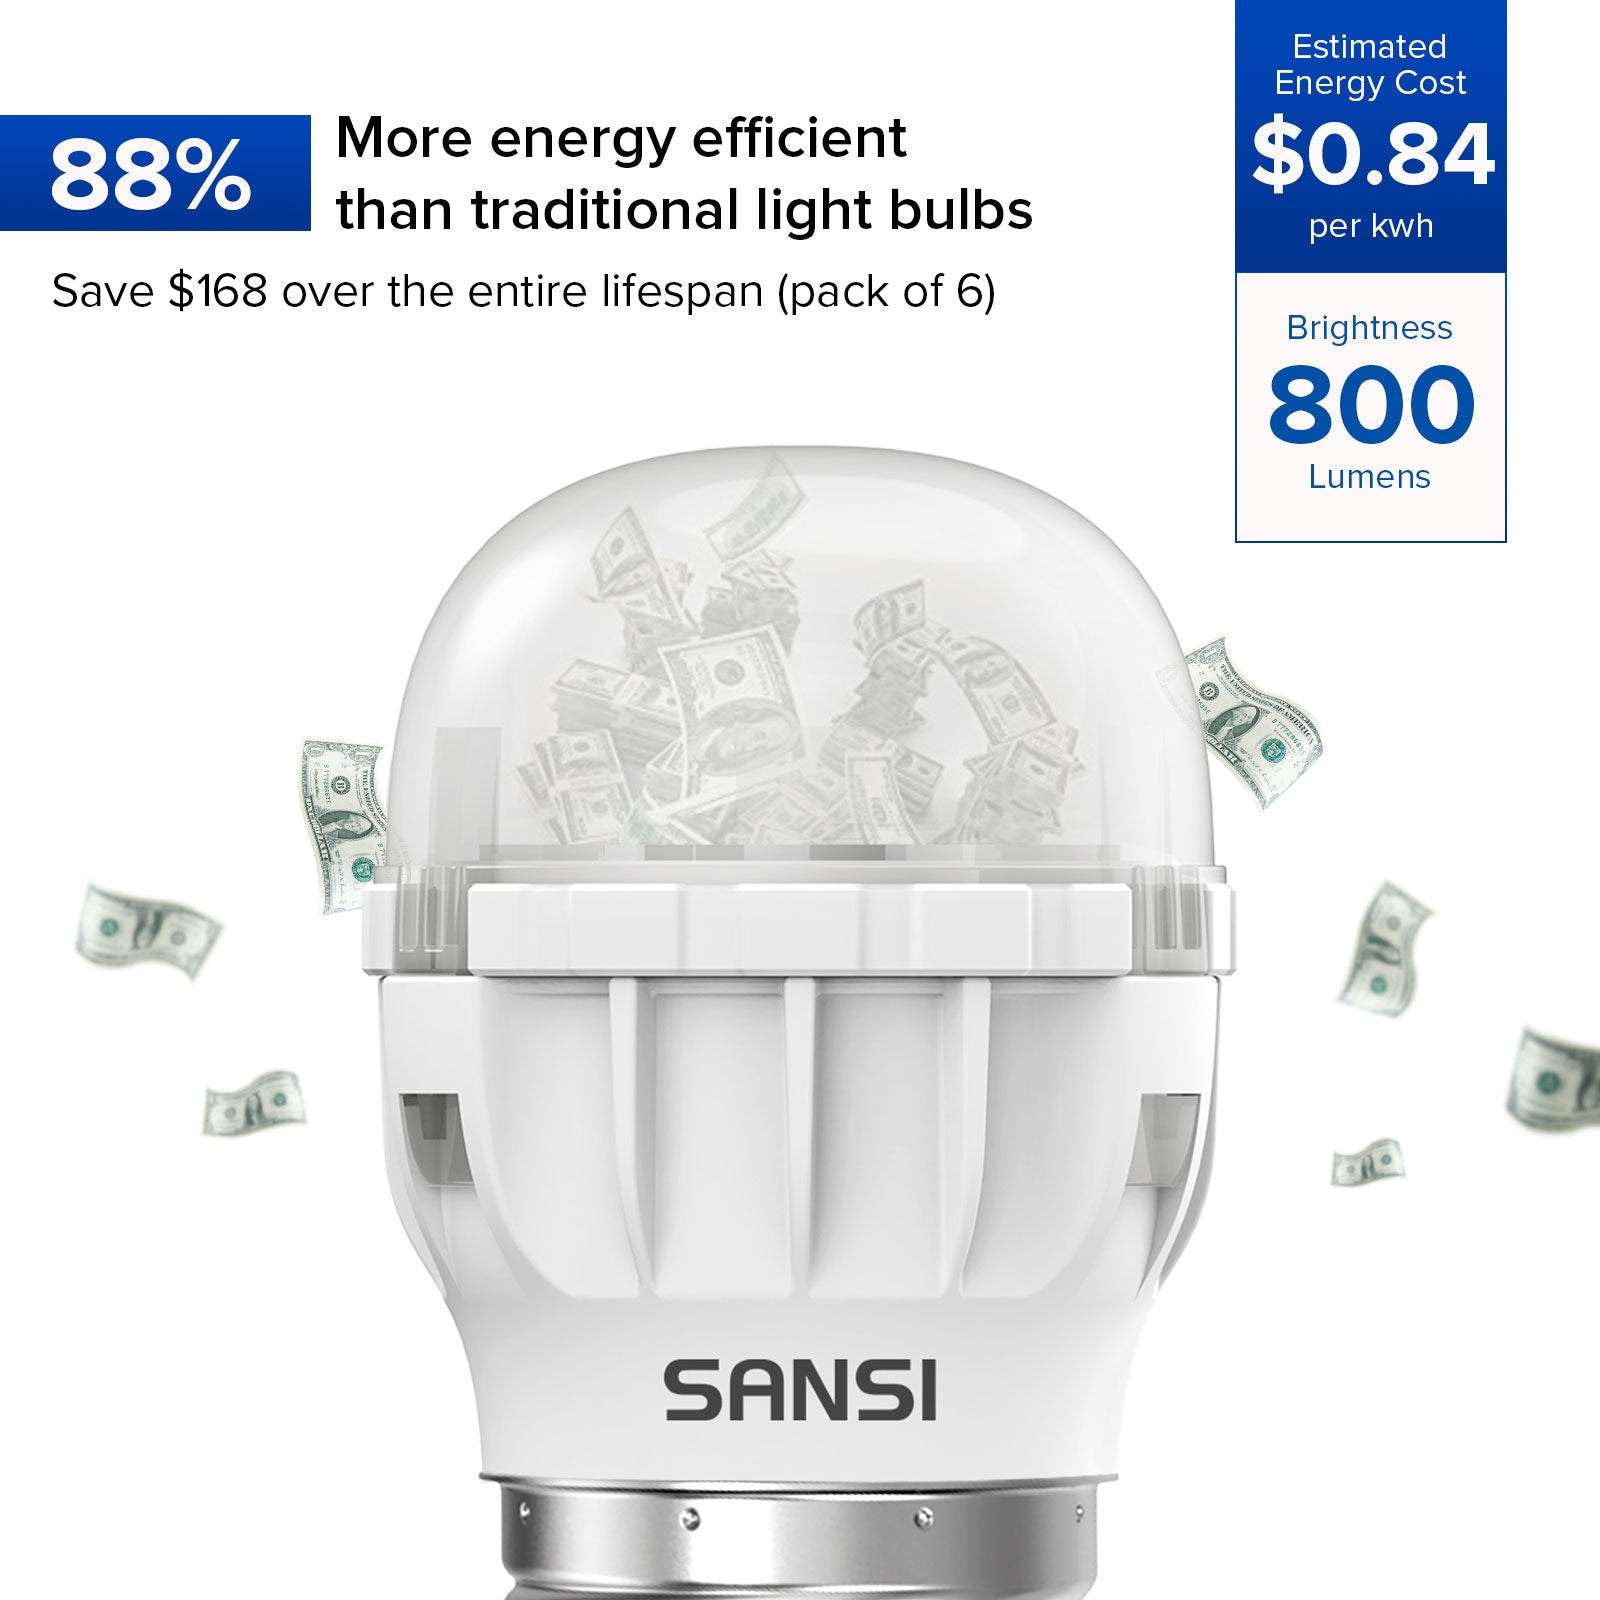  A11 7W LED Light Bulb more energy efficient than traditional light bulbs, save $168 over the entire lifespan (Pack of 6)